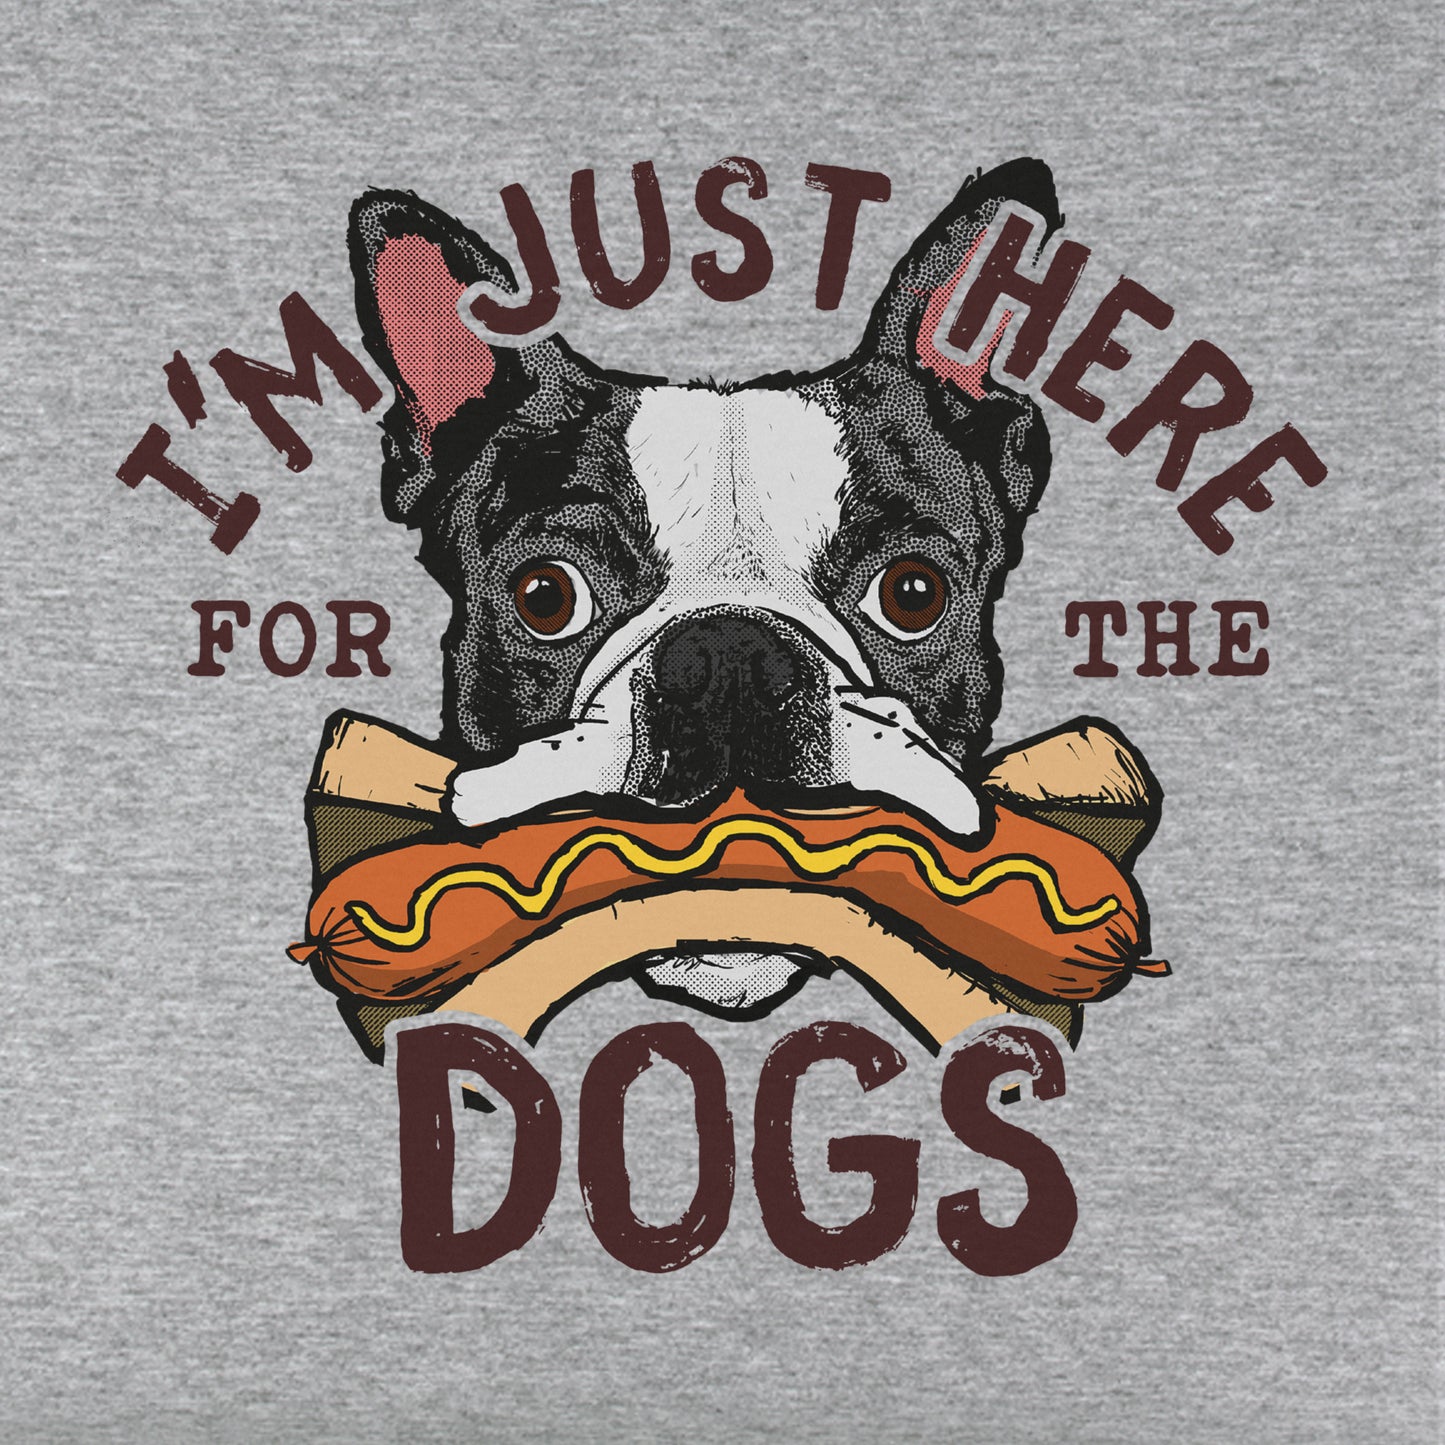 Just Here For The Dogs Youth T-Shirt - Chowdaheadz